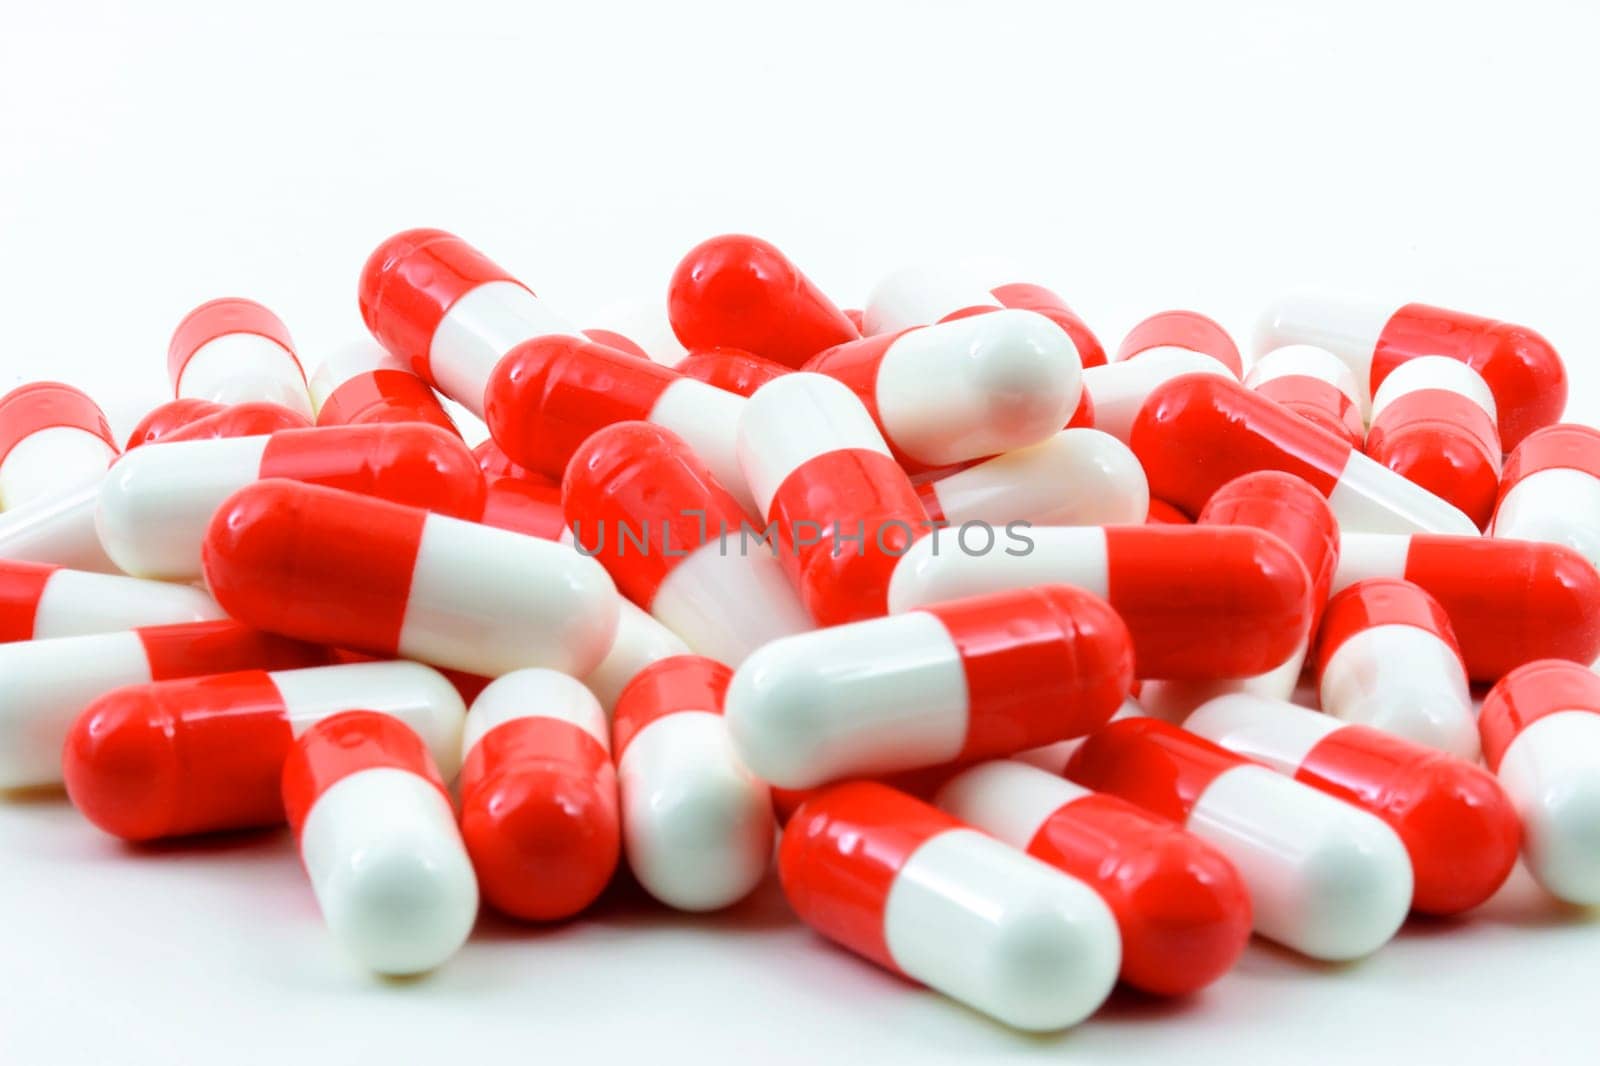 Several red and white pills by Fred_Pinheiro